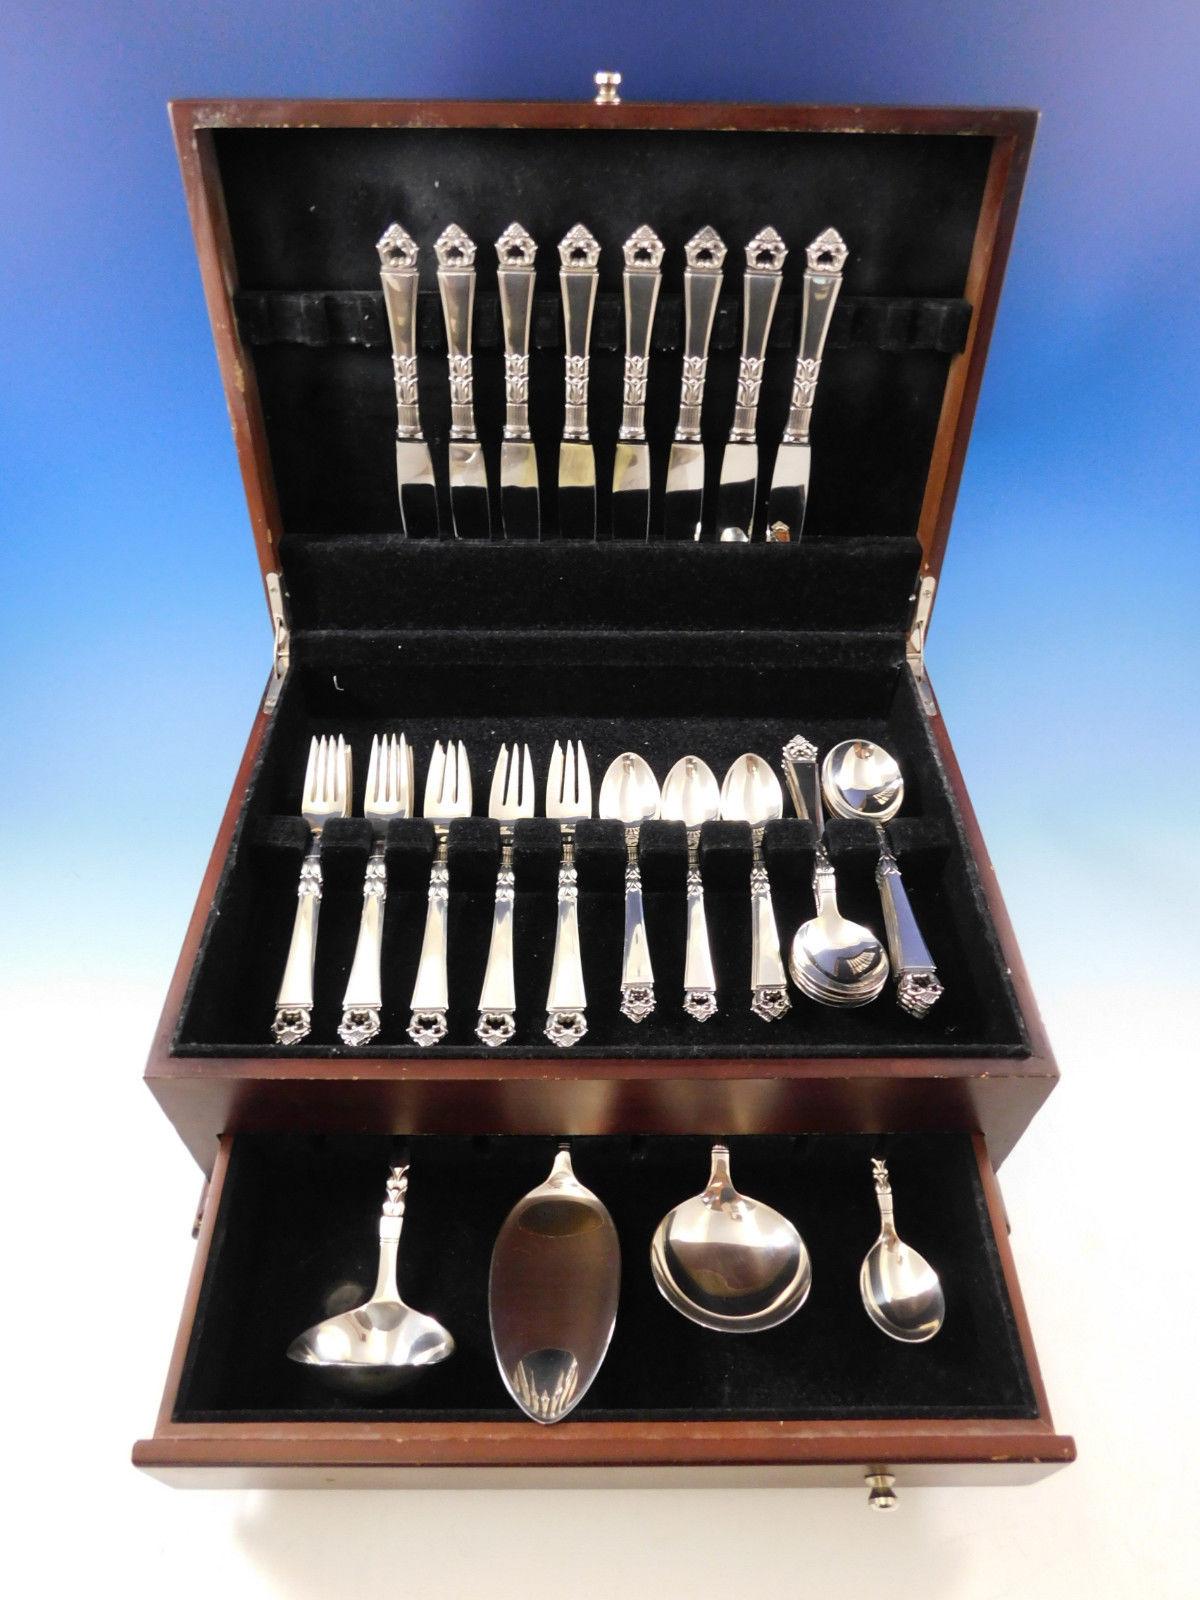 Superb Danish crown by Frigast Silversmiths of Copenhagen, Denmark sterling silver flatware set - 44 pieces. This set includes:

8 knives, 8 1/2